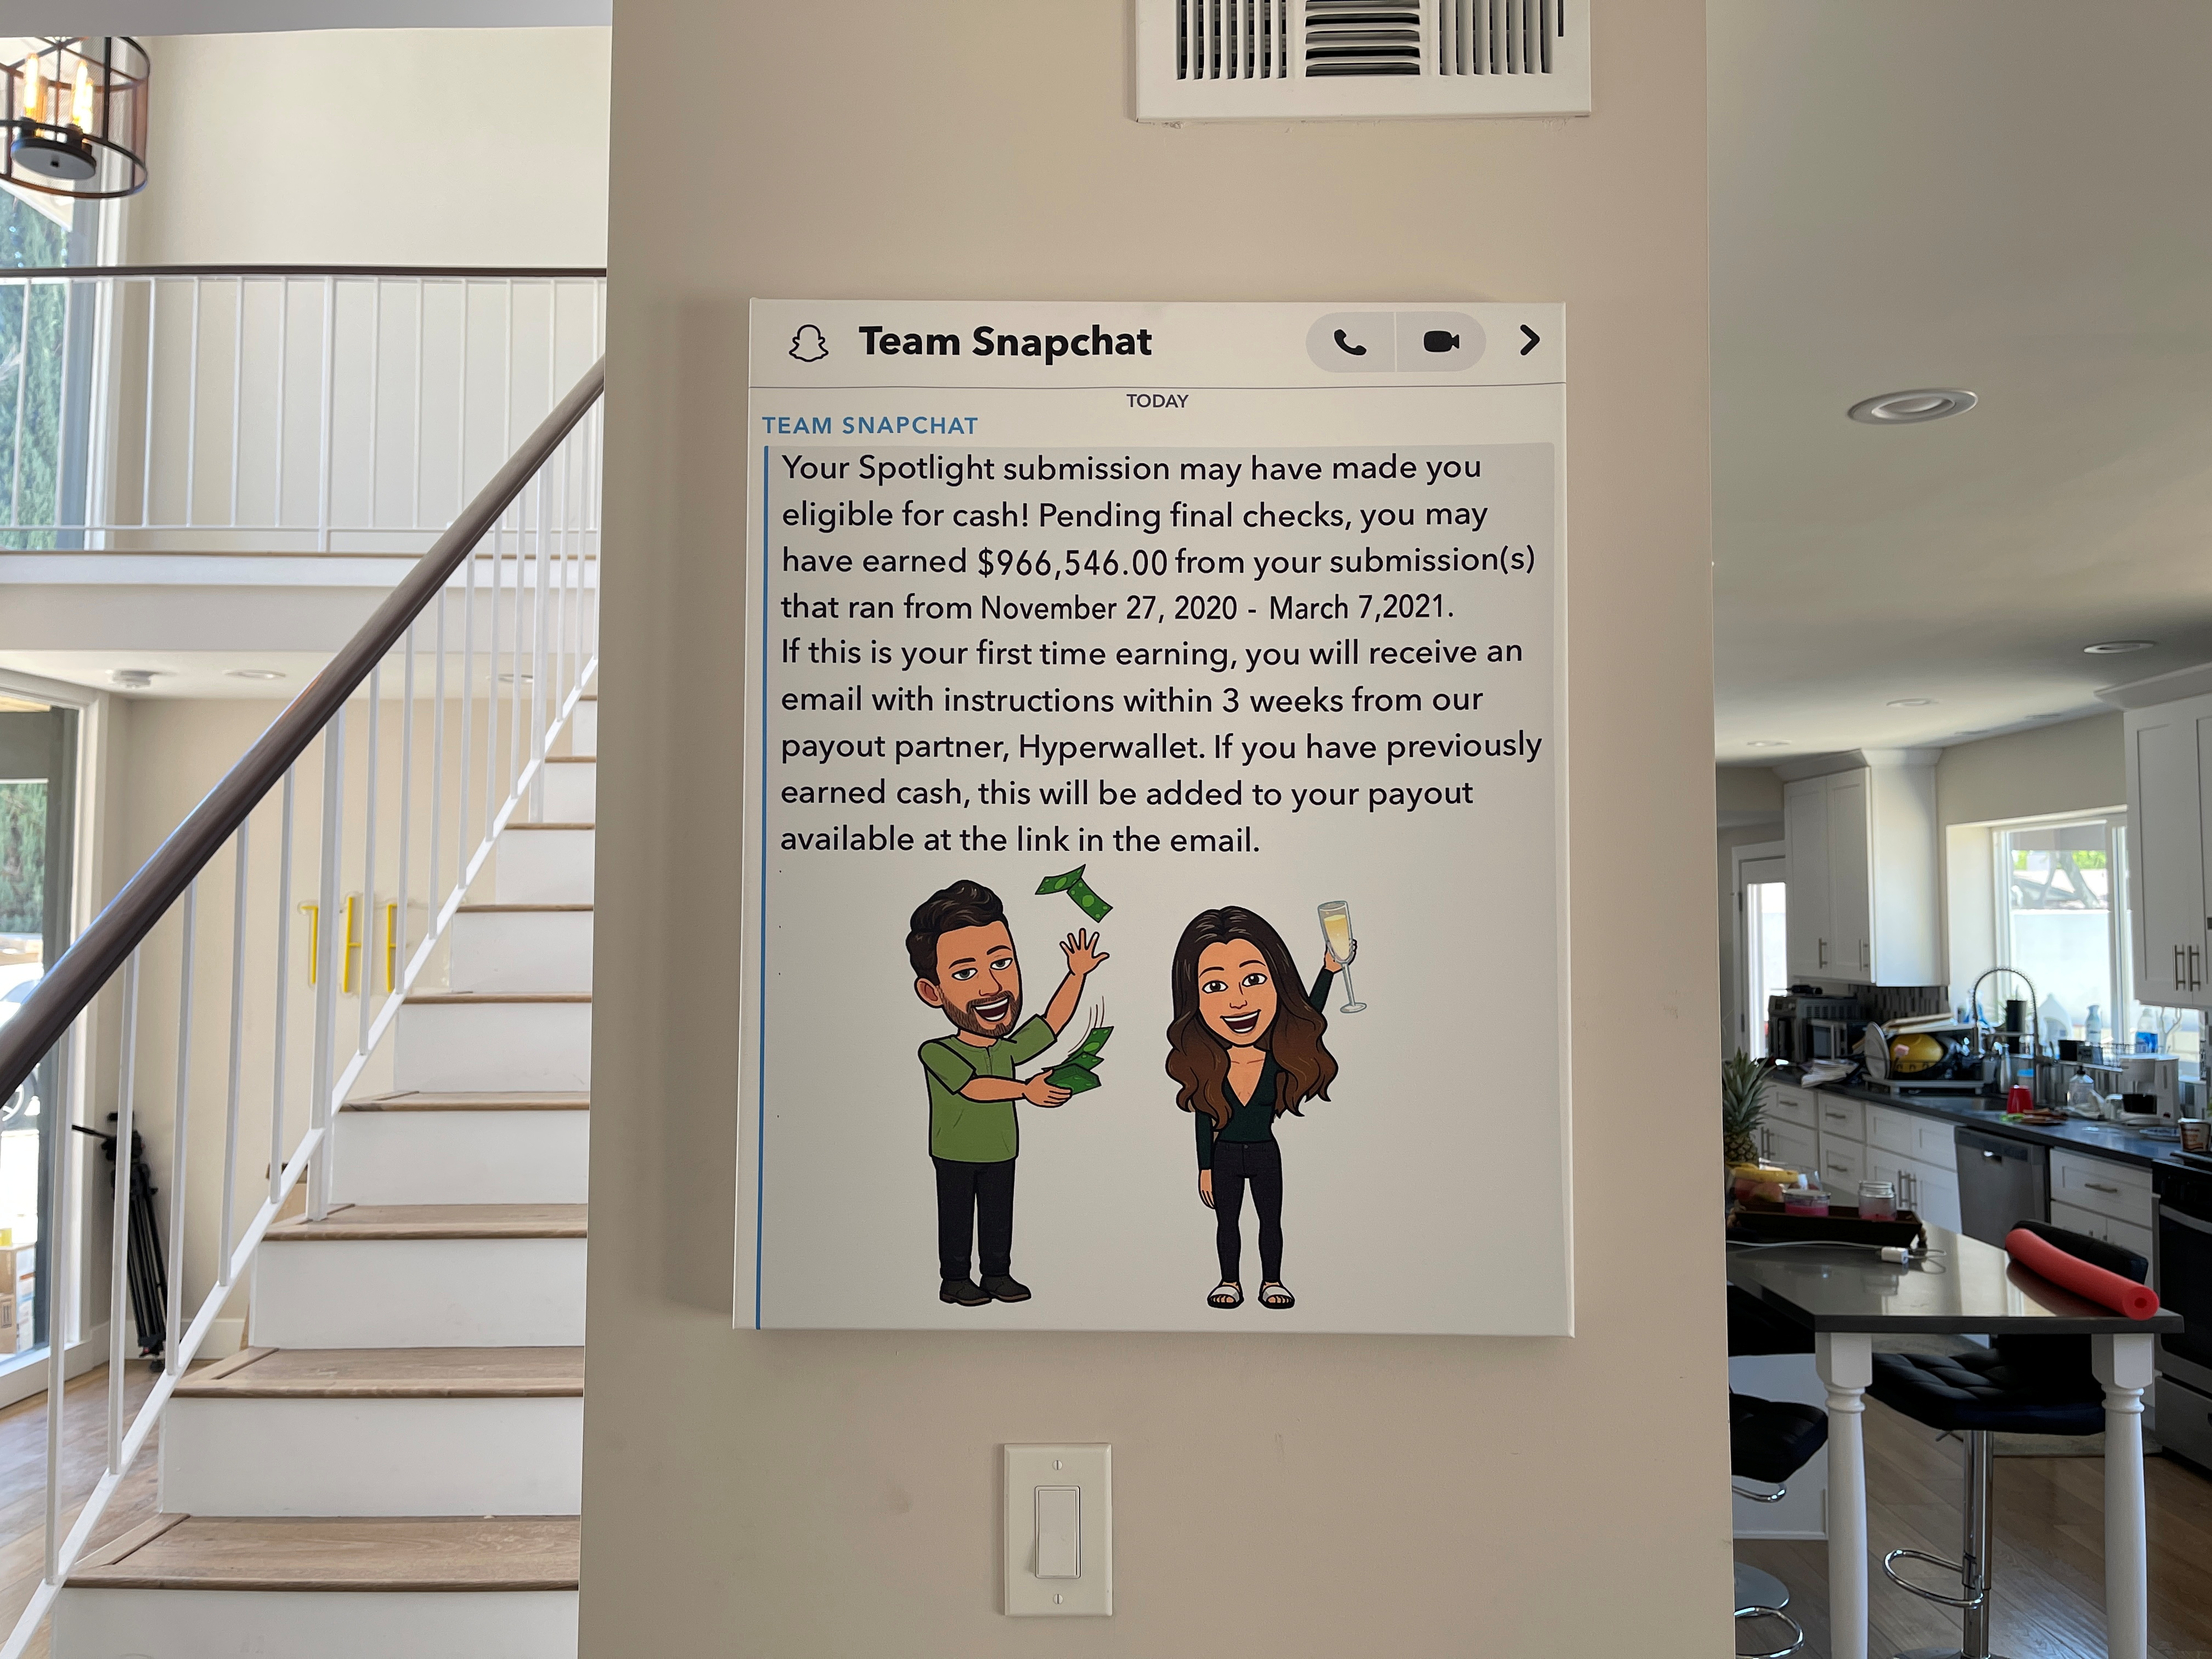 A screenshot of the earnings Dominic Andre and his girlfriend made in the past year from Snapchat hangs in their home